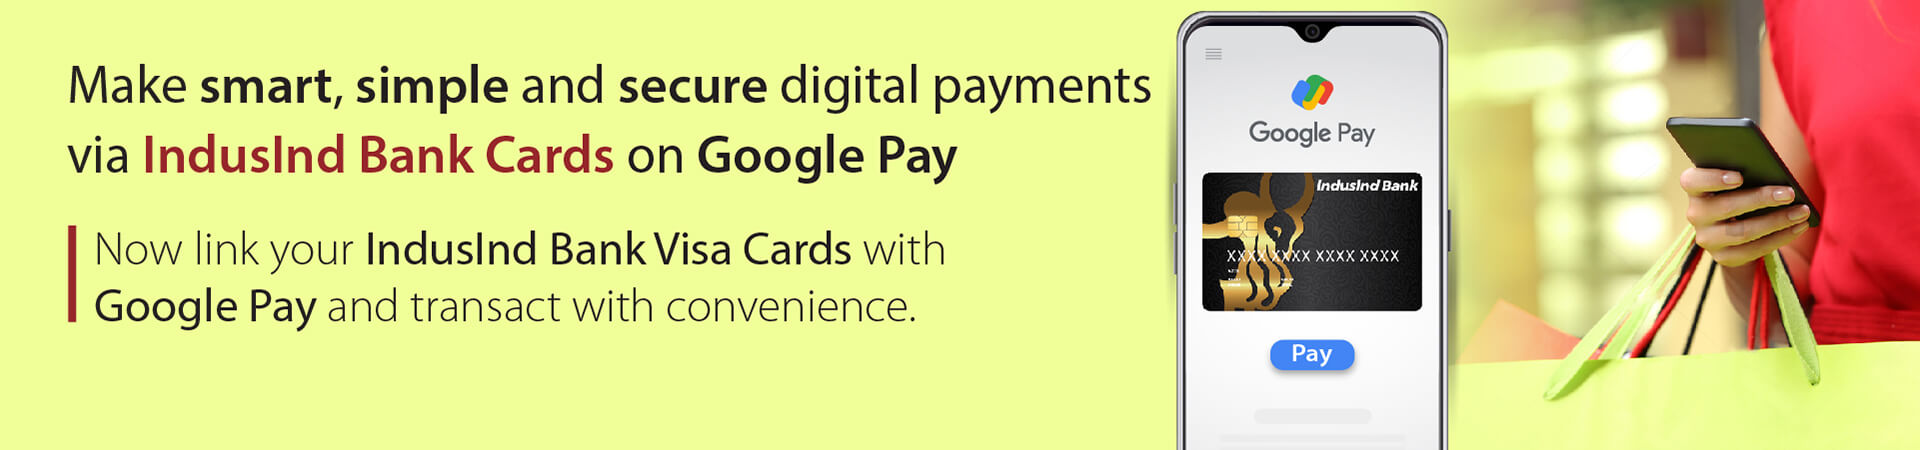 IndusInd Bank Cards on Google Pay